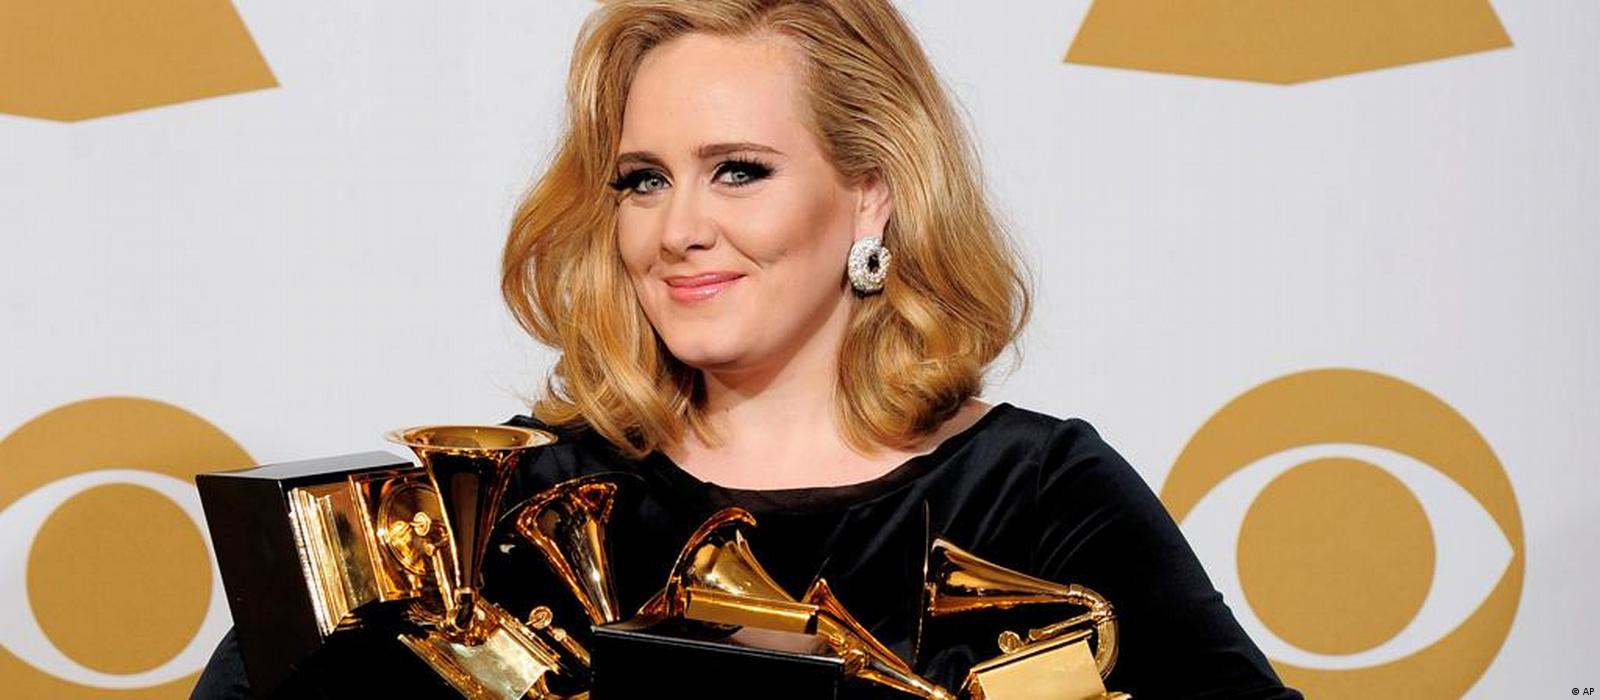 Adele wows Grammys audience – DW – 02/13/2012